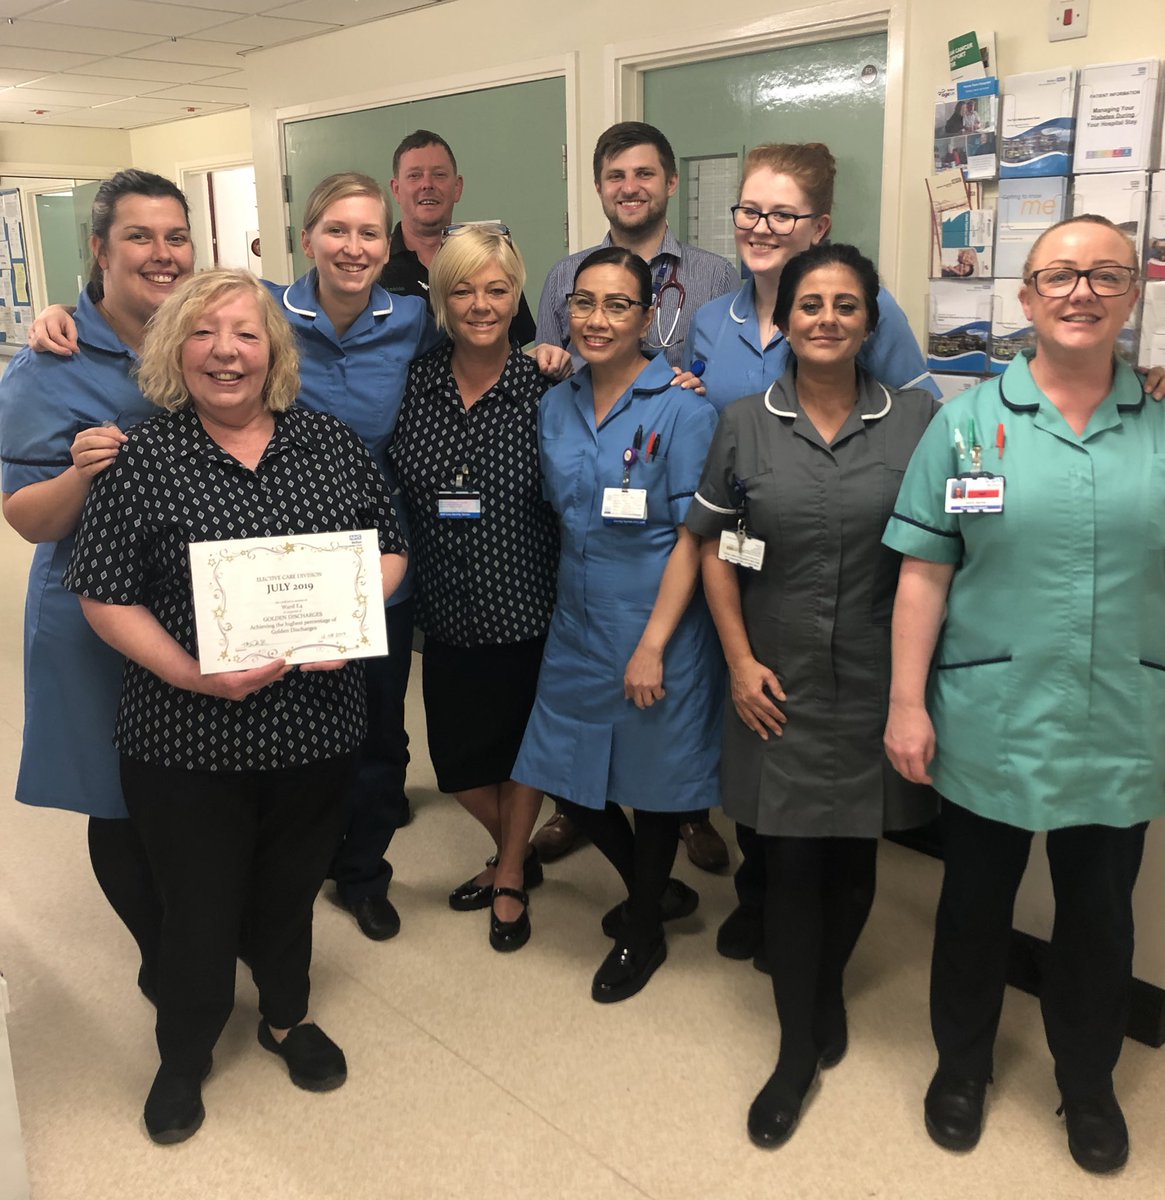 Ward E4 @boltonnhsft achieving the highest percentage of Golden Discharges, demonstrating excellent approach to helping patients go home at the right time of day #getmehome 🏅👏👏👏#teamwork #patientsafety #wherebestnext @ECISTNetwork @bizzylizzy13